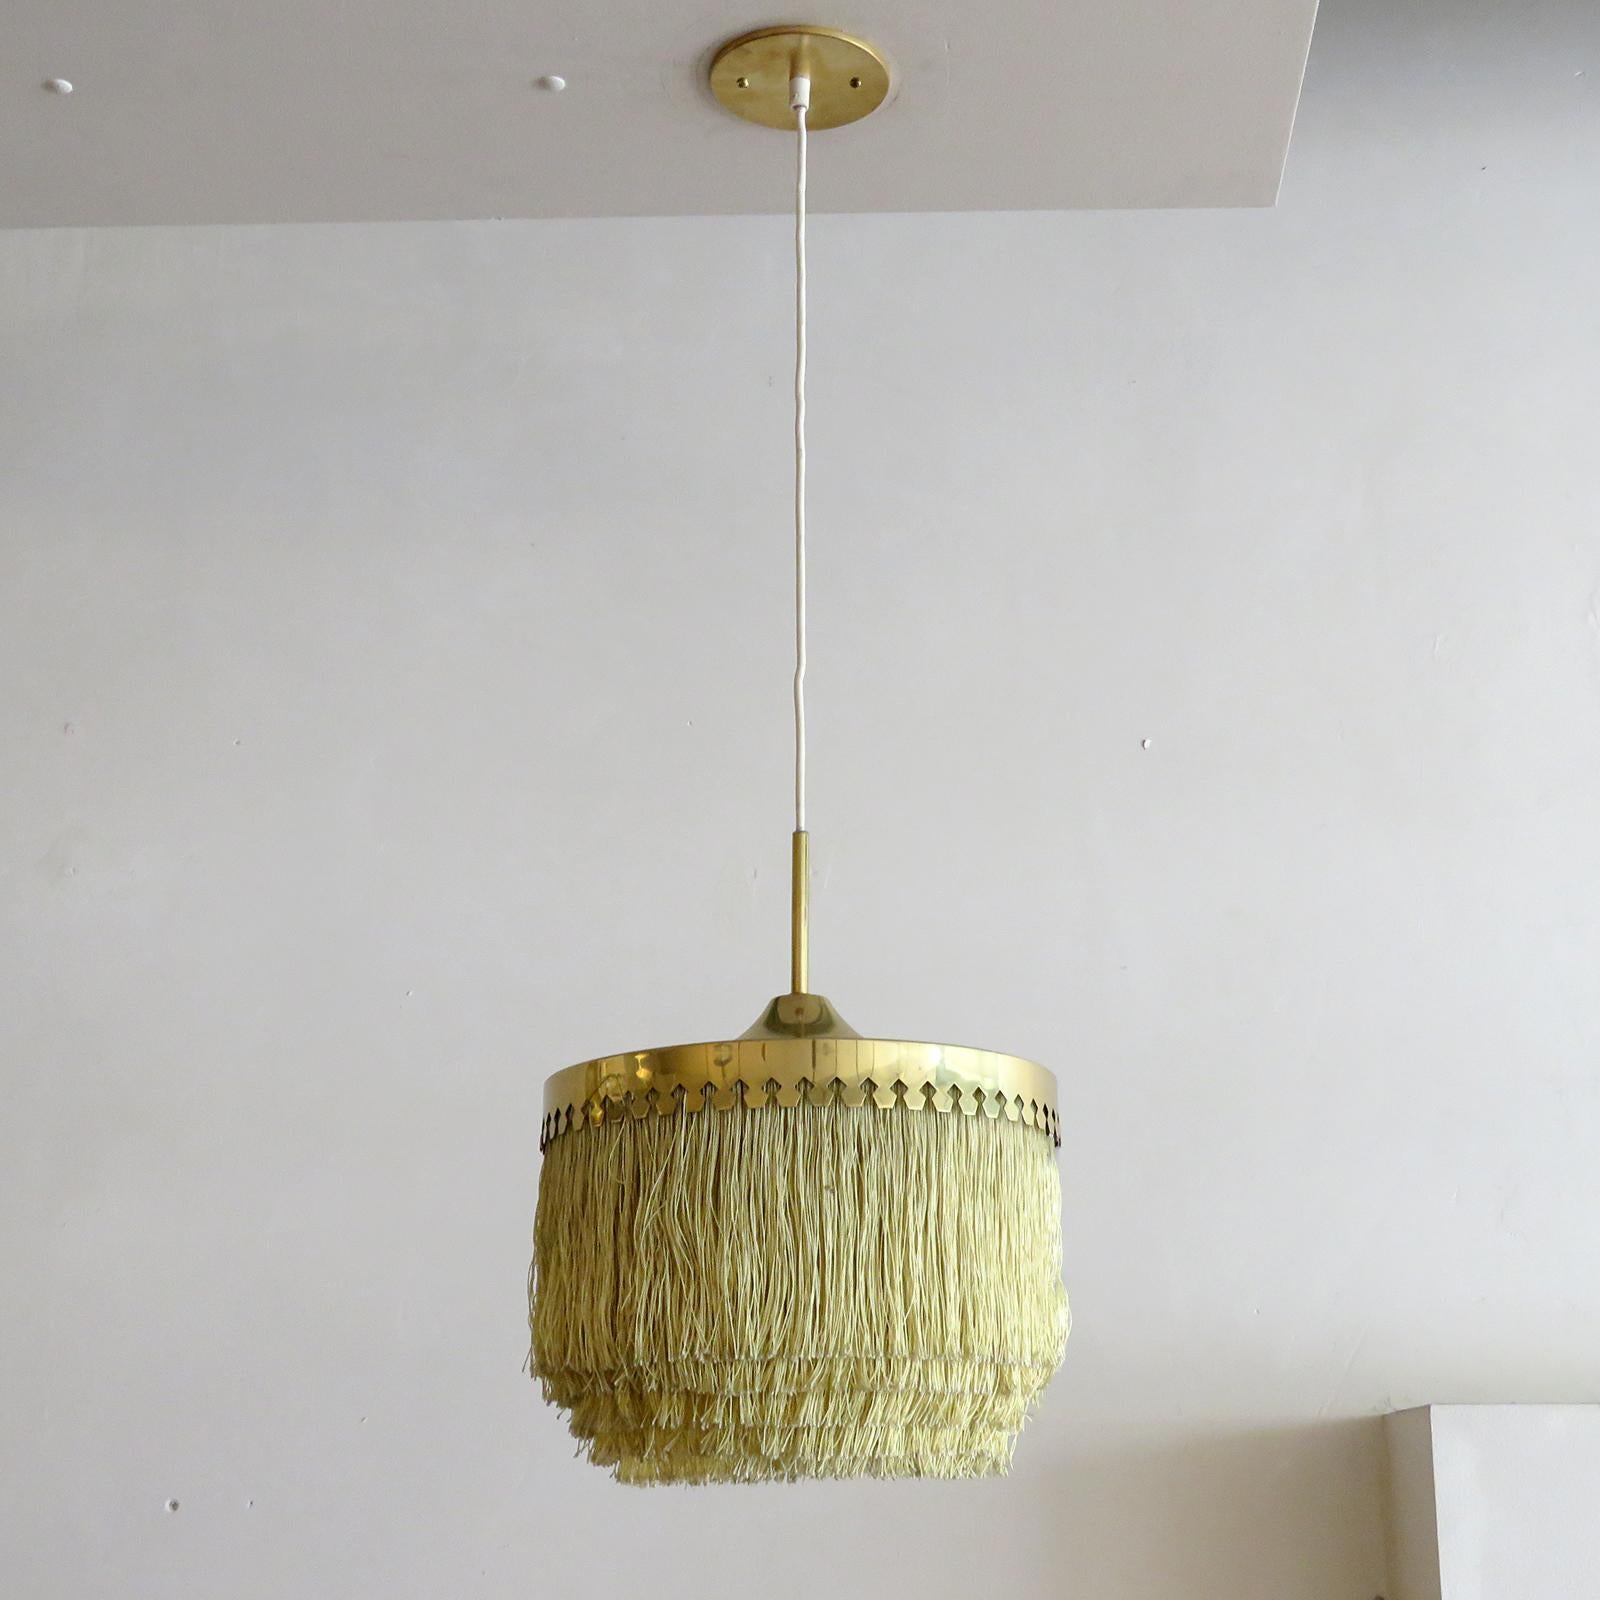 Wonderful pendant lamp by Hans-Agne Jakobsson for Markaryd, Sweden, 1960, with five tiers of off-white fringe silk cord with brass hardware frame and original white canopy. Overall drop can be customized, wired for US standards, one E27 socket, max.